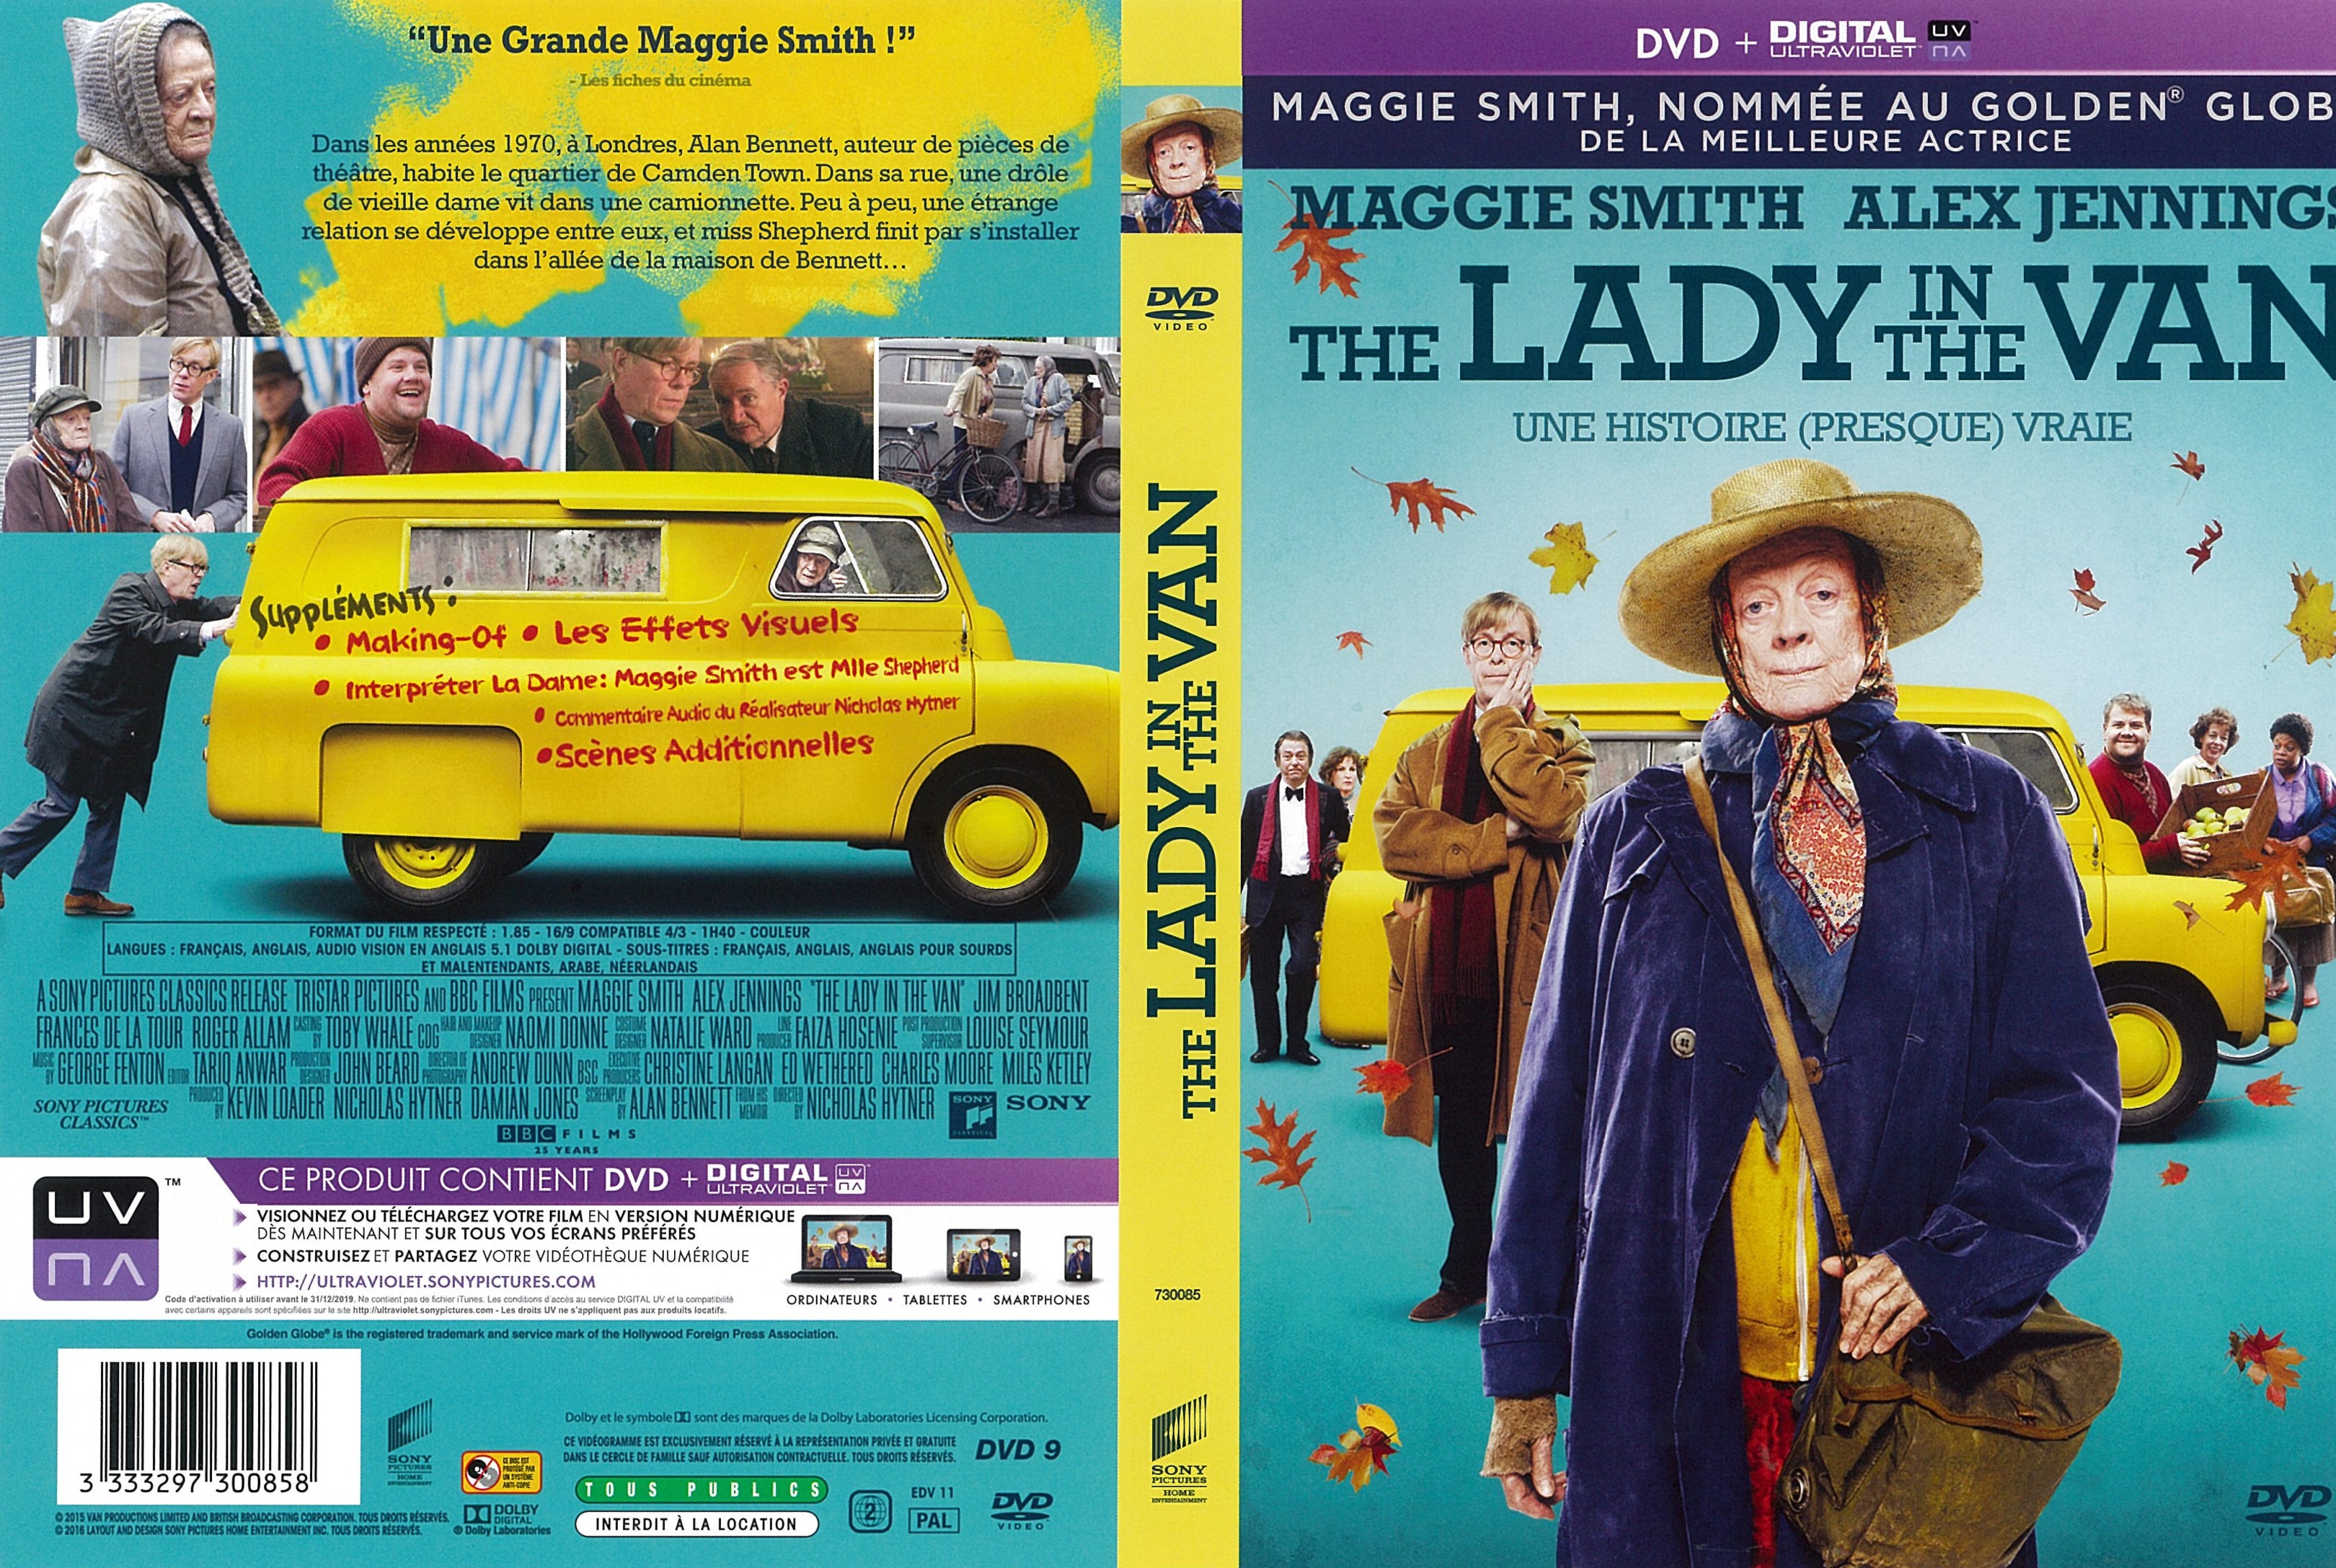 Jaquette DVD The Lady In The Van